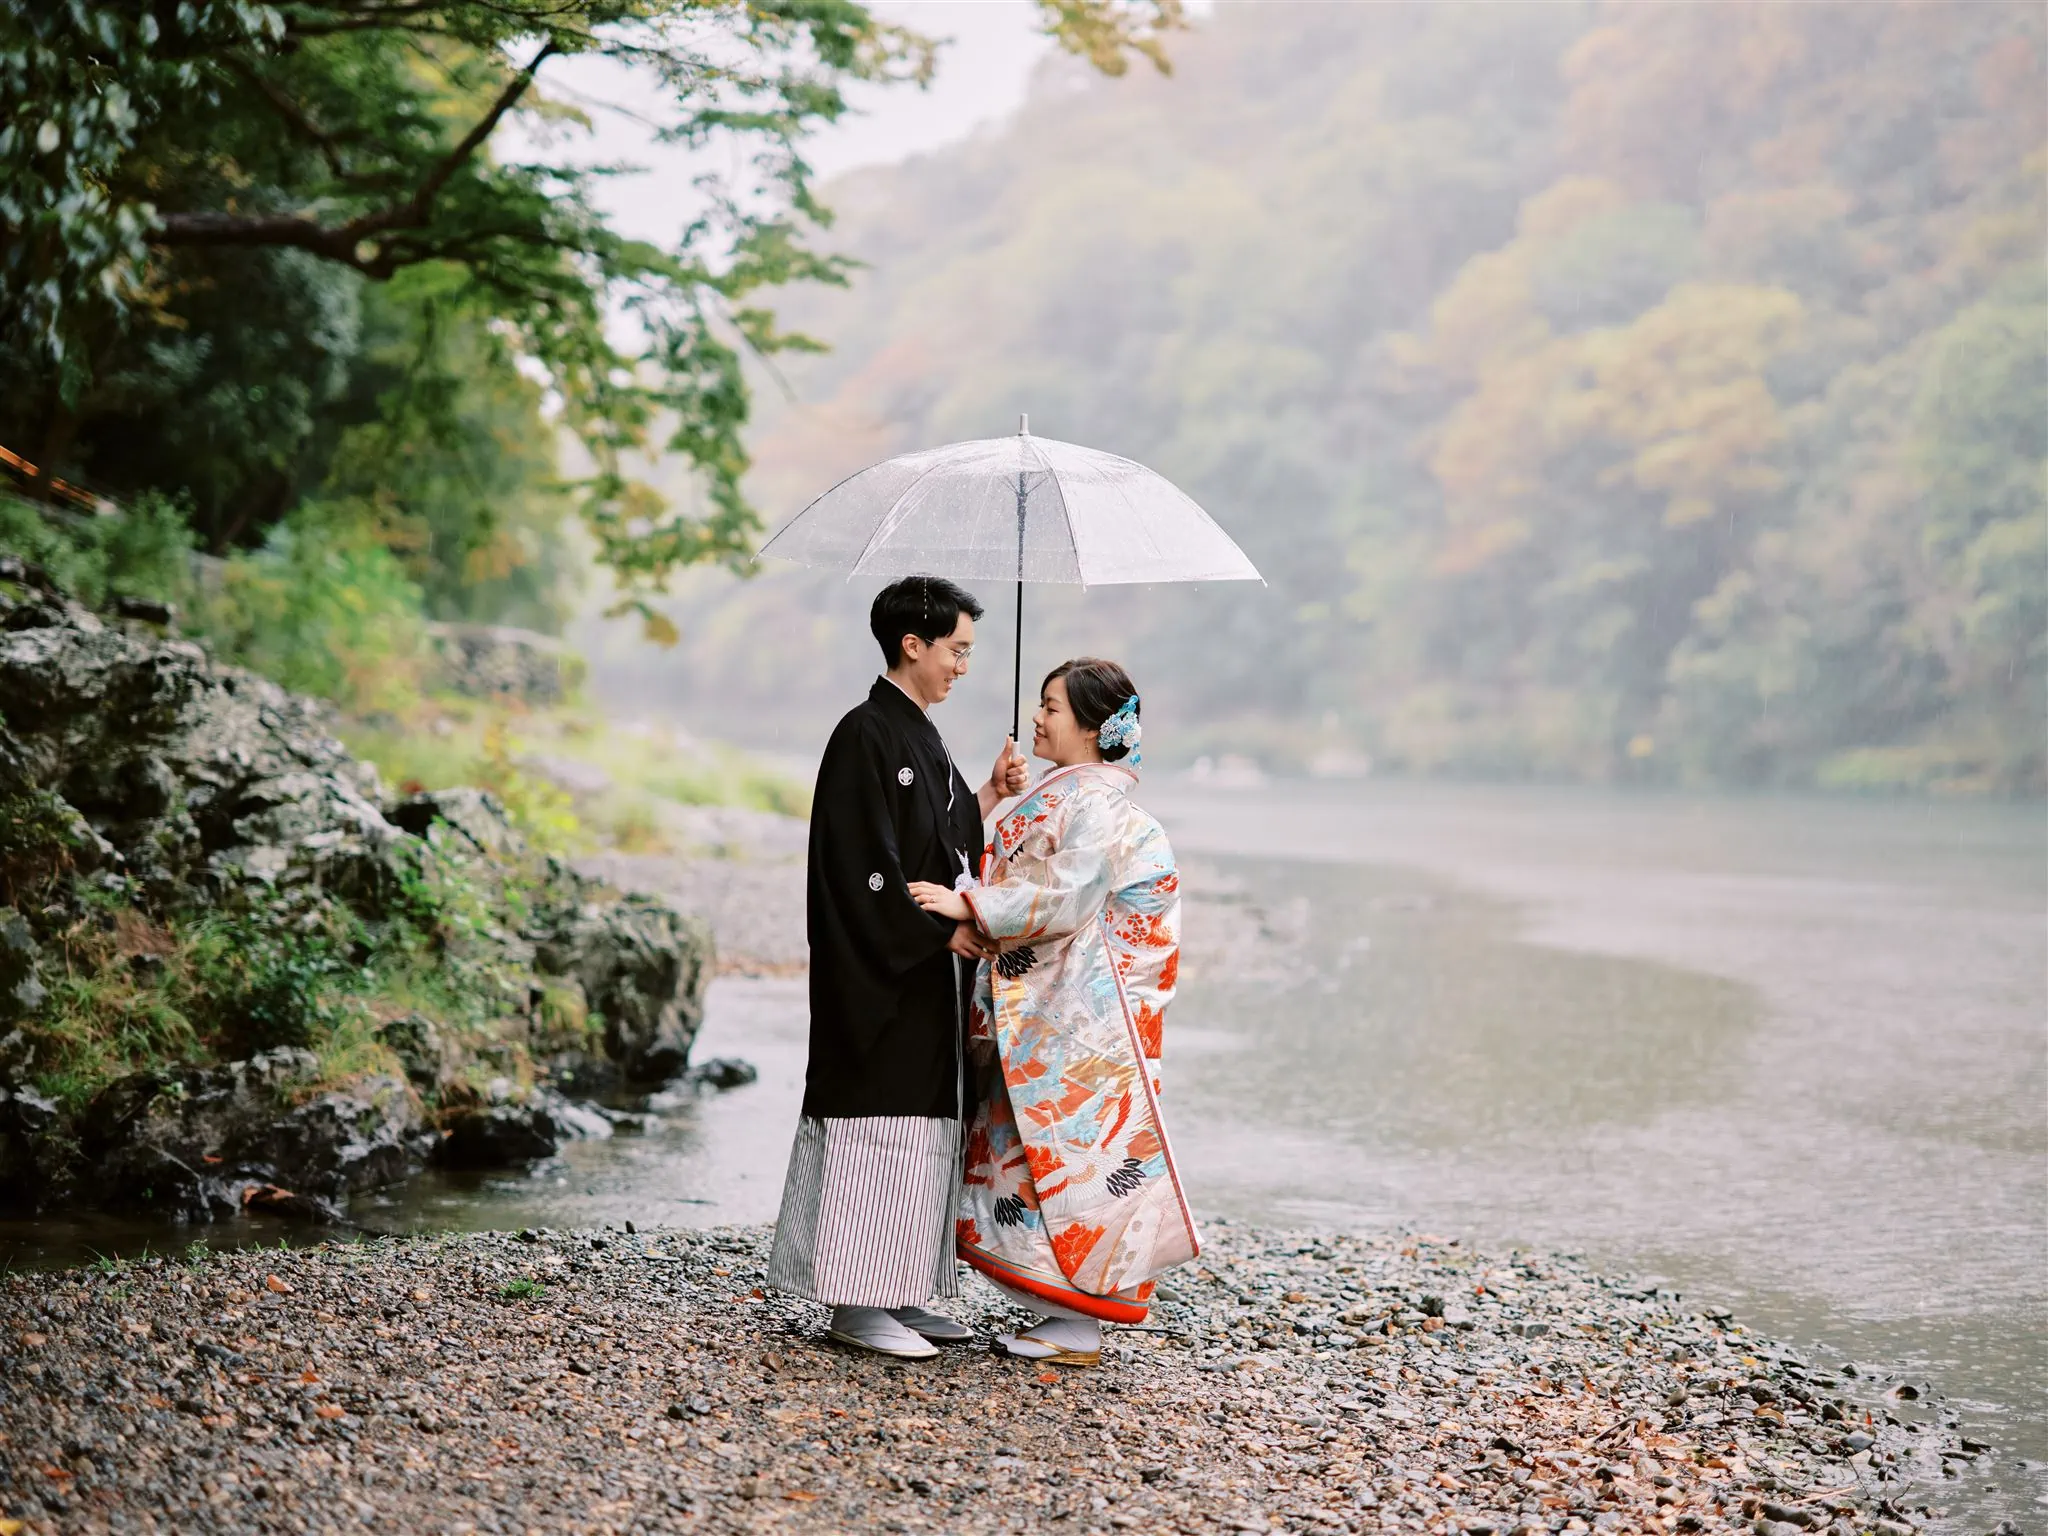 Kyoto Tokyo Japan Elopement Wedding Photographer, Planner & Videographer | An elopement photographer captures a japanese couple standing by a river with an umbrella.